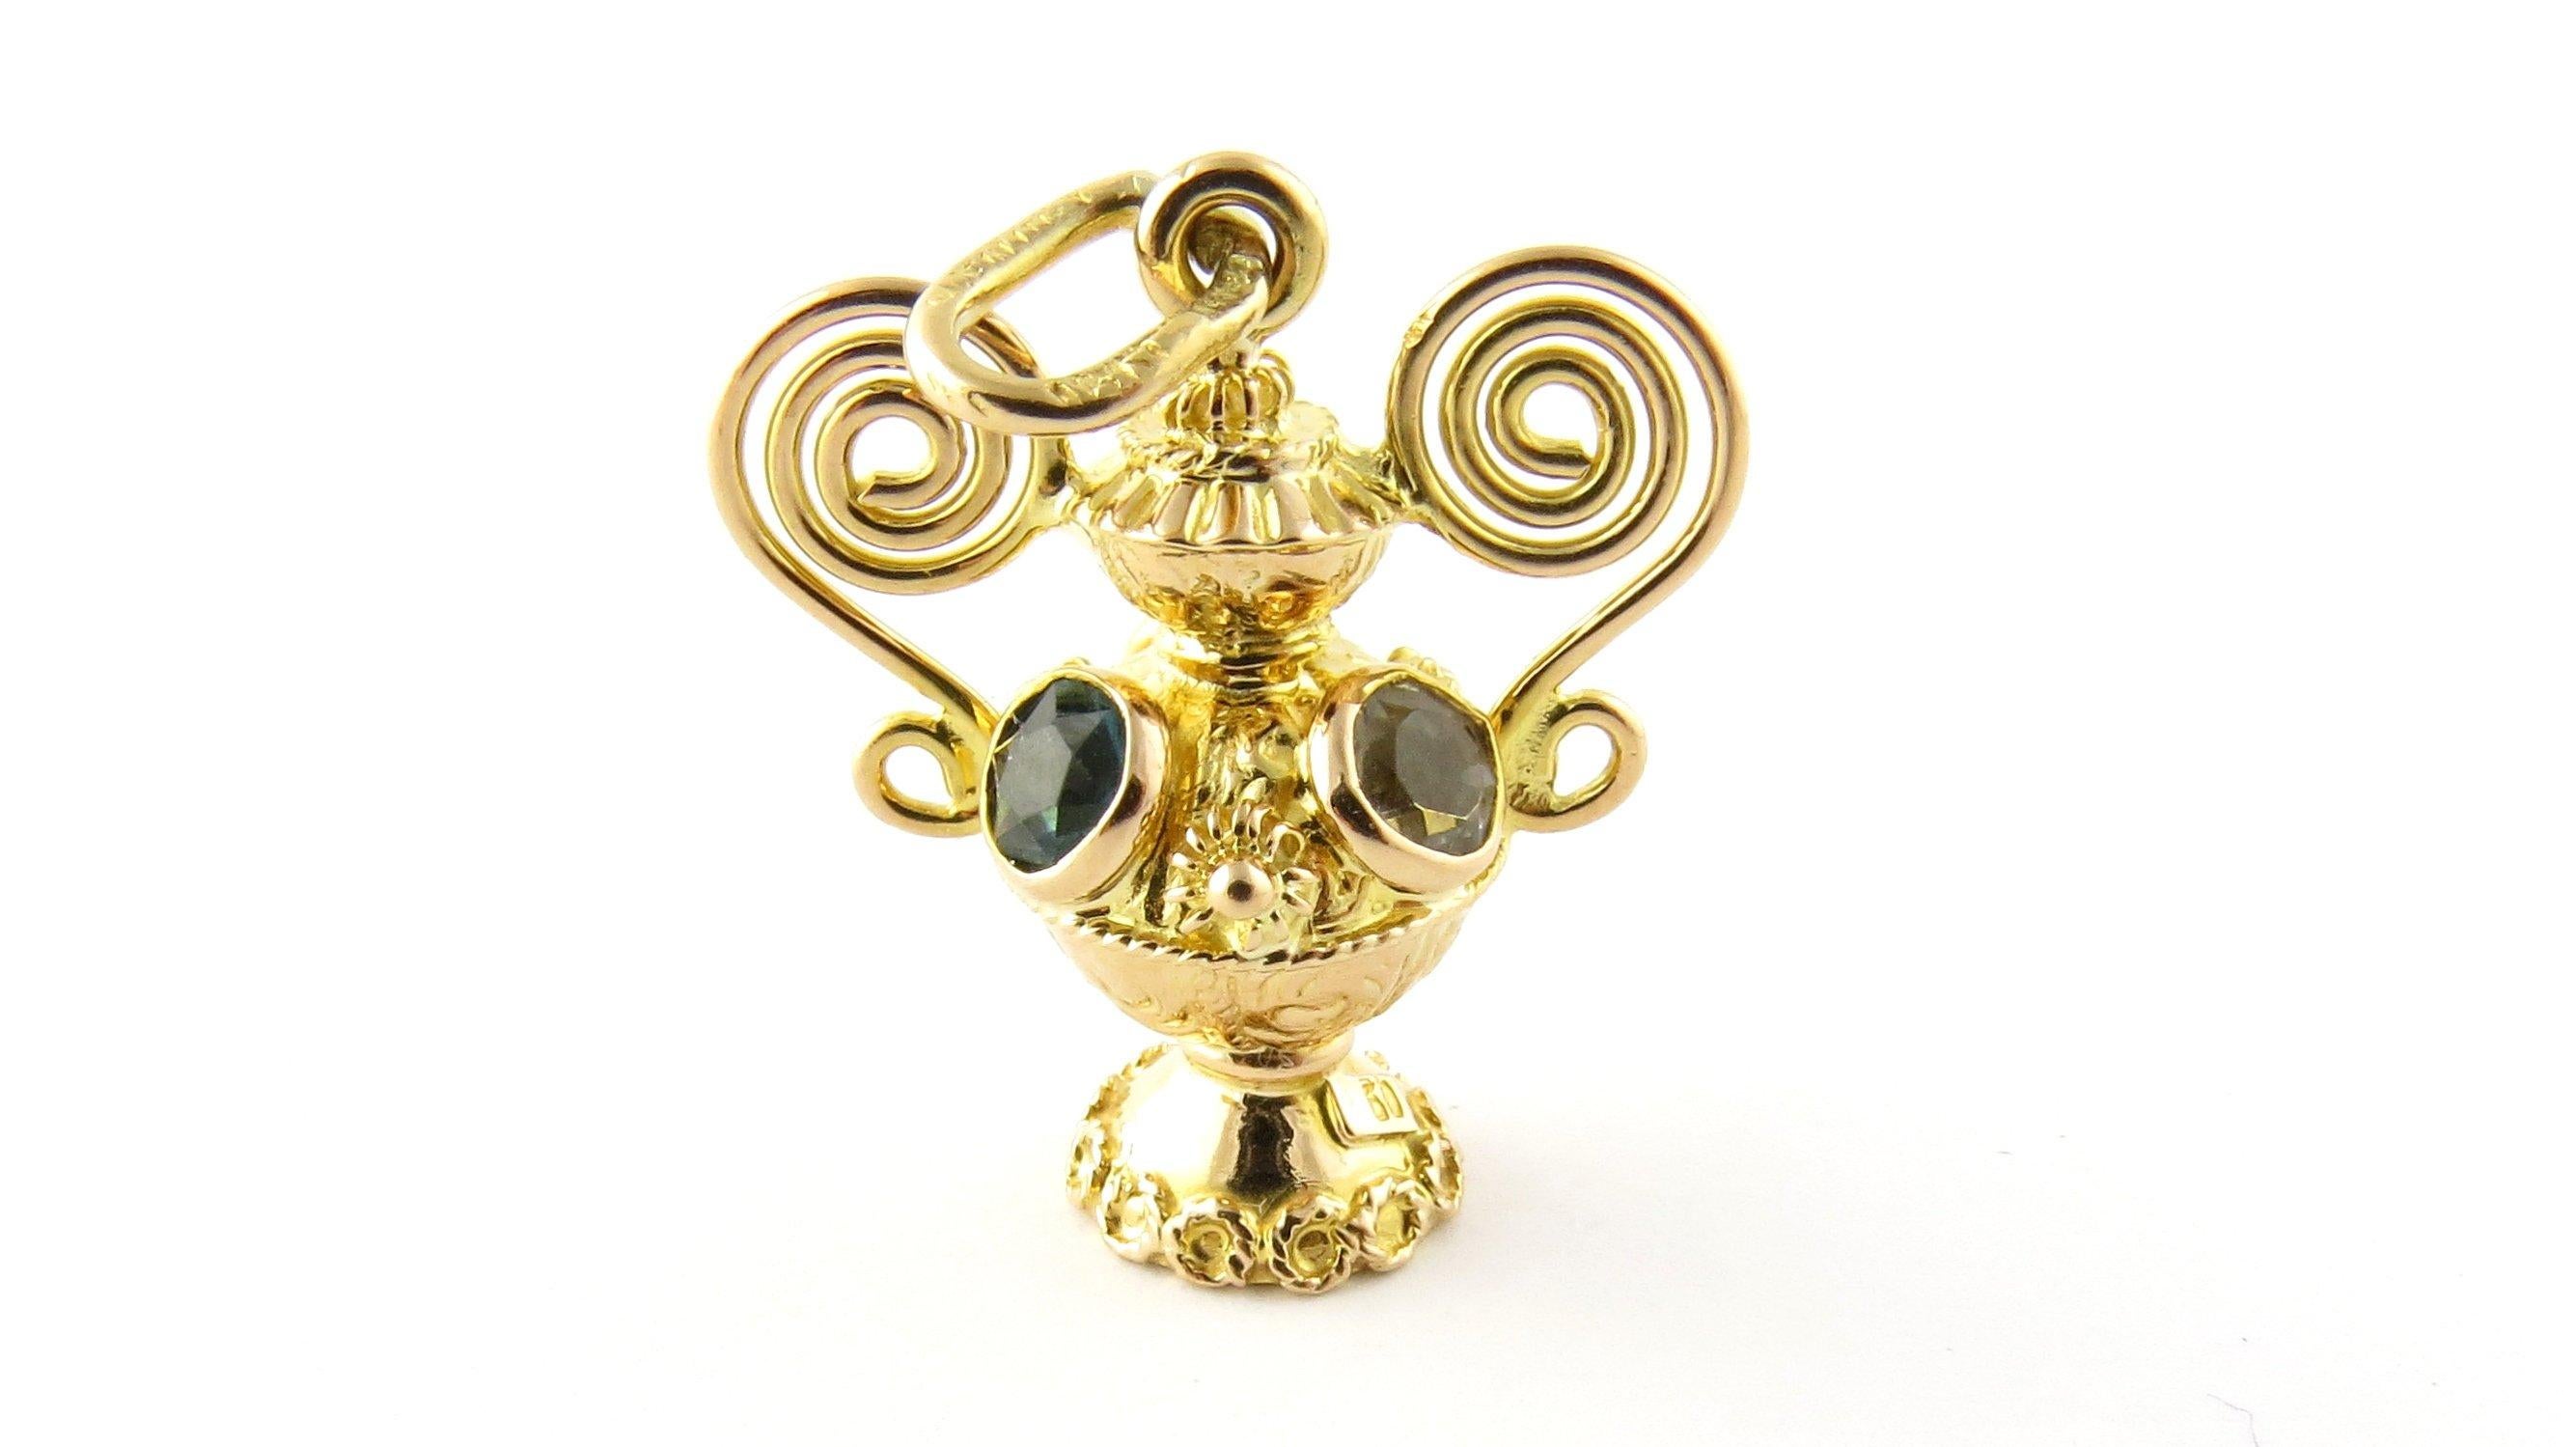 Vintage 18 Karat Yellow Gold Vase Pendant with Colored Stones
This lovely pendant features an ornate vase decorated with three colored stones (amber, light blue, blue/green) set in meticulously detailed 18K yellow gold.
Size: 27 mm x 24 mm
 Weight: